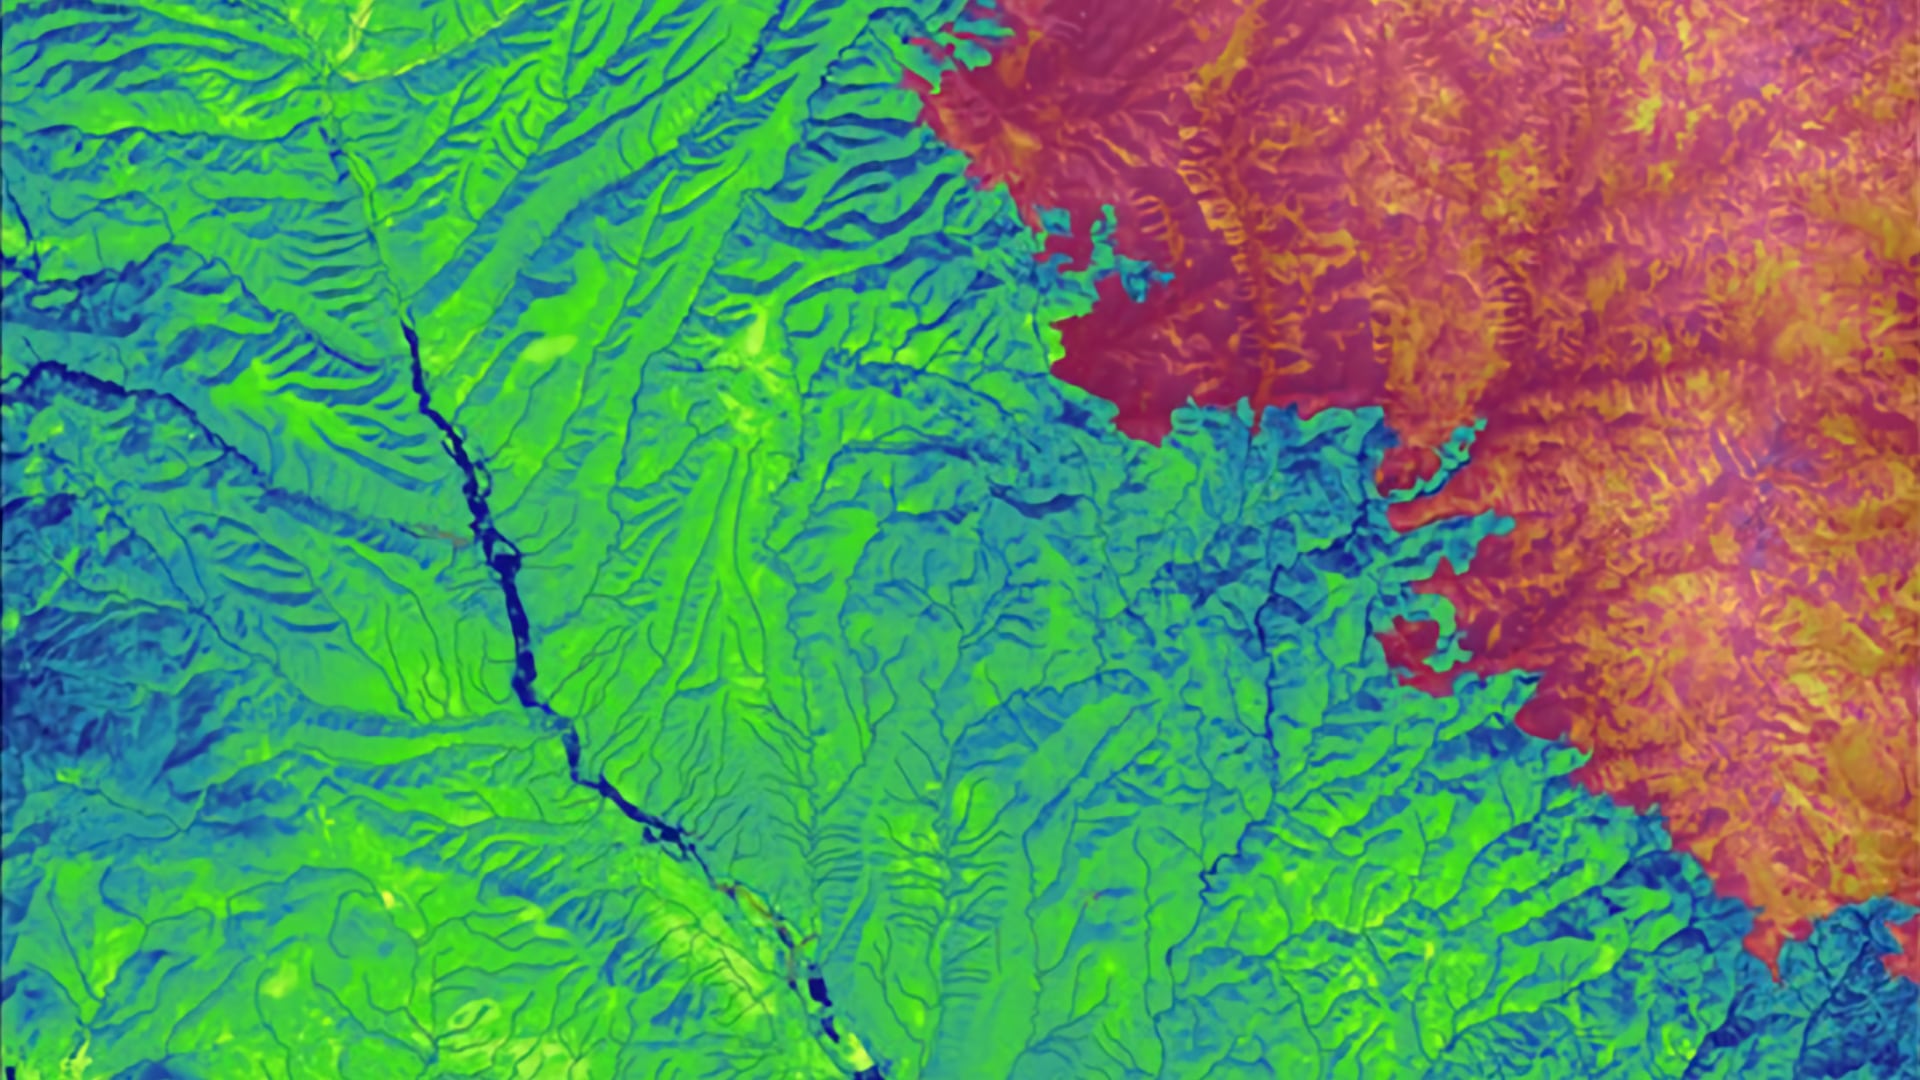 (1) Change in vegetation regrowth post-Silver Fire (2013) in Gila National Forest Watershed from 2013-2019 using NBR, calculated from Landsat-8 OLI imagery. Fire area delineated with warm-color scale, yellow and pink represent high and low vegetation regrowth respectively.  (2) NDWI calculated from 2019 Landsat-8 OLI image, emphasizing stream visualization underneath stream vector where dark blue represents high water content. This helps forest managers understand vegetation recovery and how burned areas interact with hydrology of the watershed.  Keywords: Gila National Forest, wildfire, watershed, hydrology, vegetation recovery, NBR, Landsat